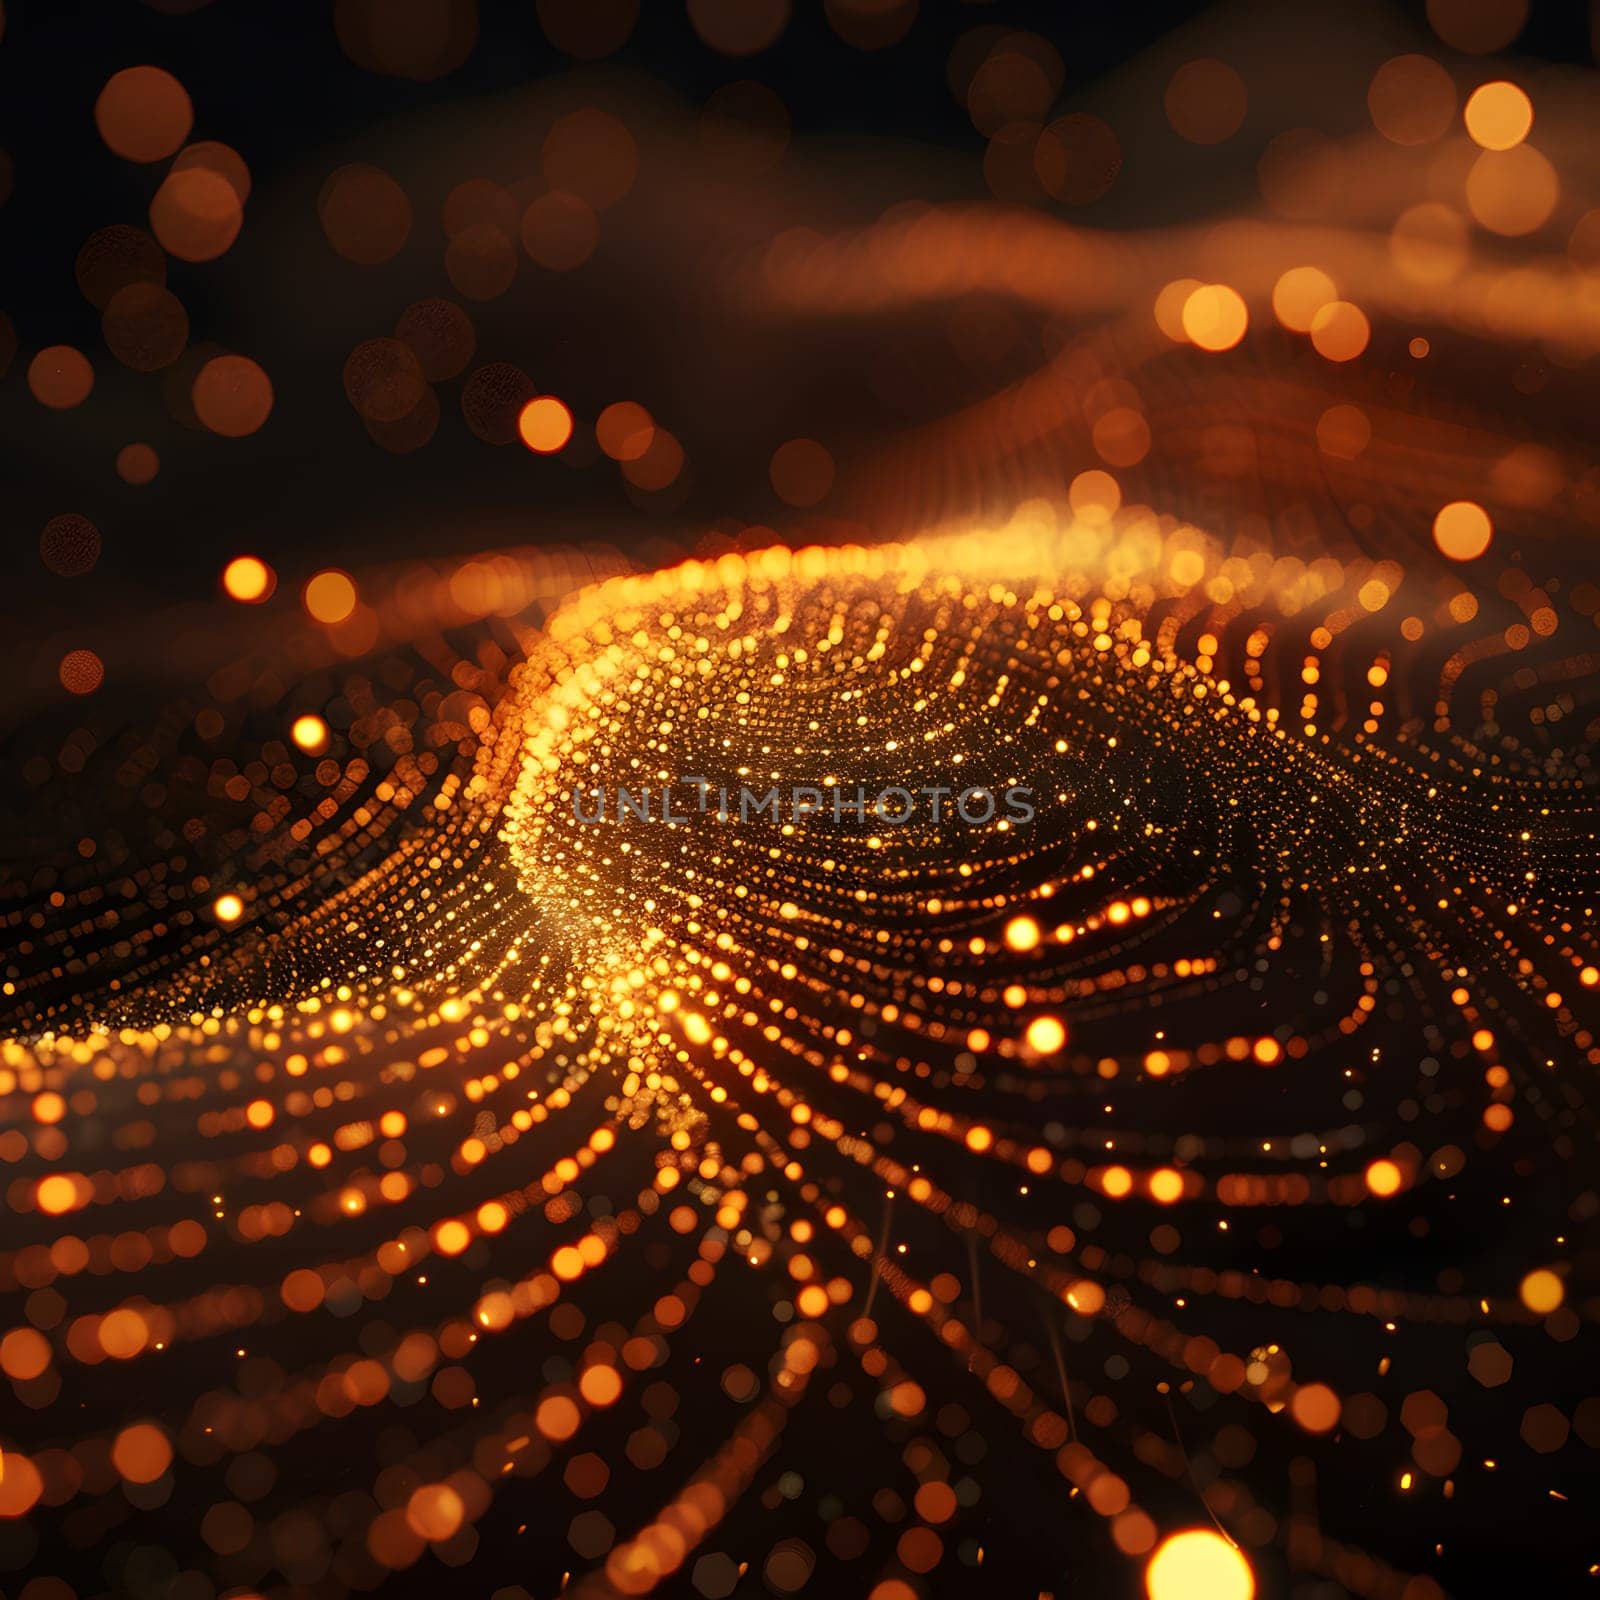 Closeup swirl of gold particles resembling liquid in motion by Nadtochiy